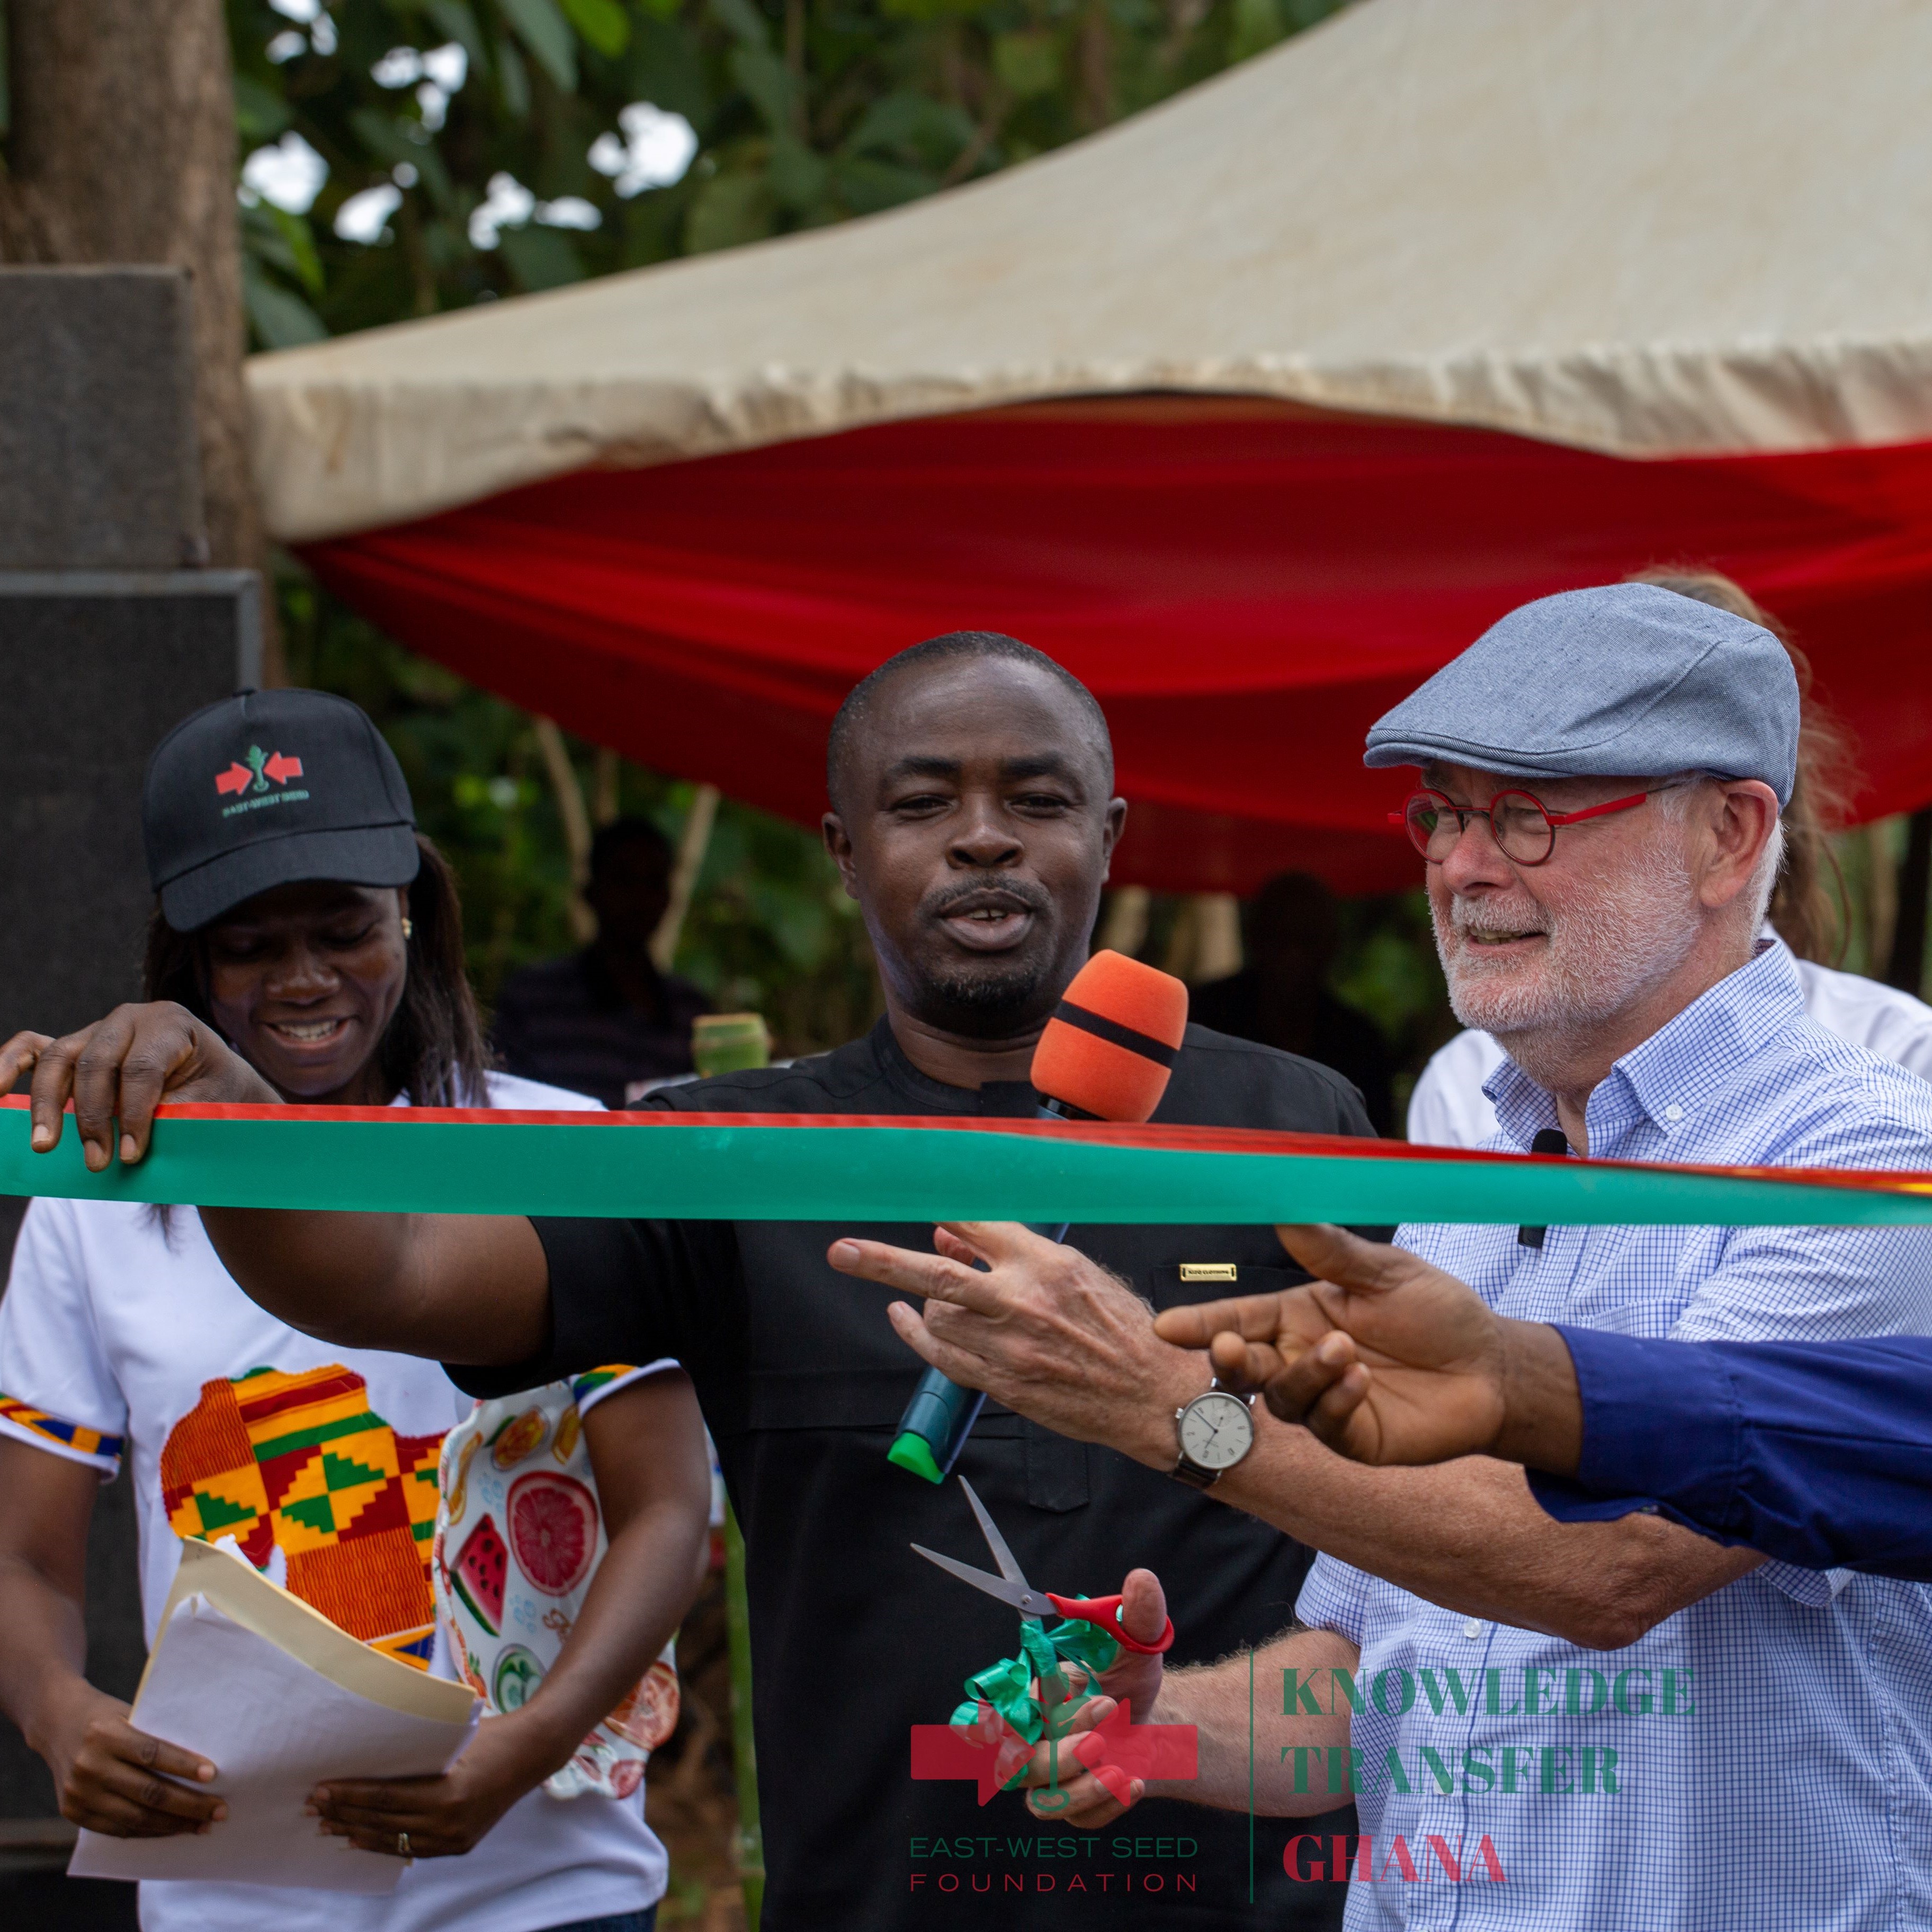 H.E. Jeroen Verheul (center), Ambassador of the Netherlands Embassy to Ghana, prepares to cut the ribbon for the opening of the Ghana learning farm as Jemima Djah, EWS-KT Knowledge Transfer Manager for Ghana and Ansu Kumi, Municipal Chief Executive for the Sunyani Municipal Assembly look on.